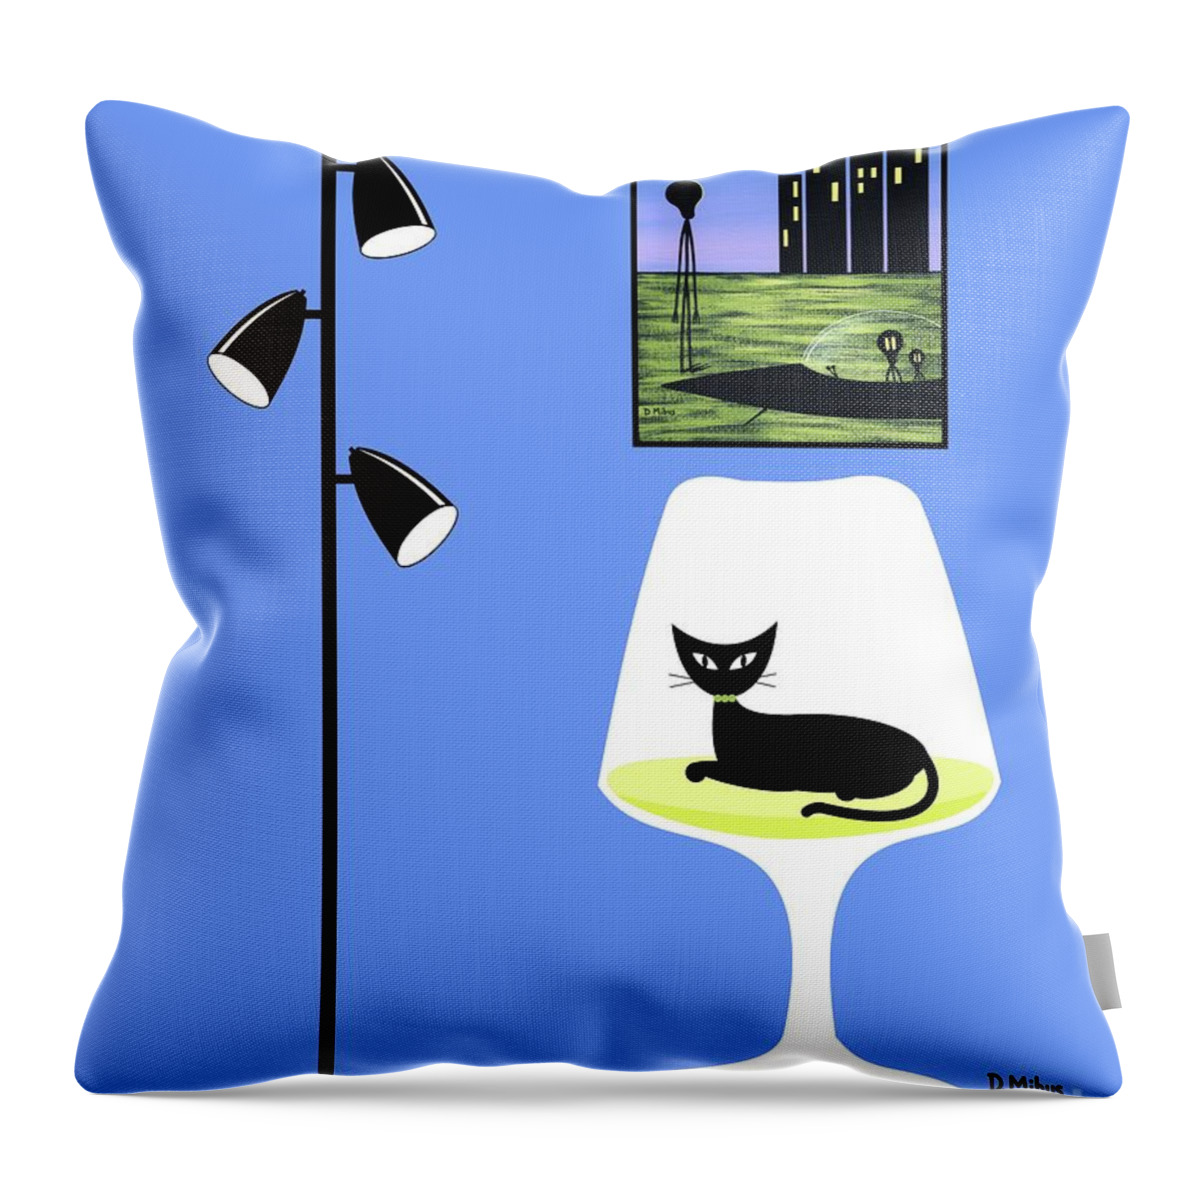  Throw Pillow featuring the digital art Mini Friendly Alien Family by Donna Mibus